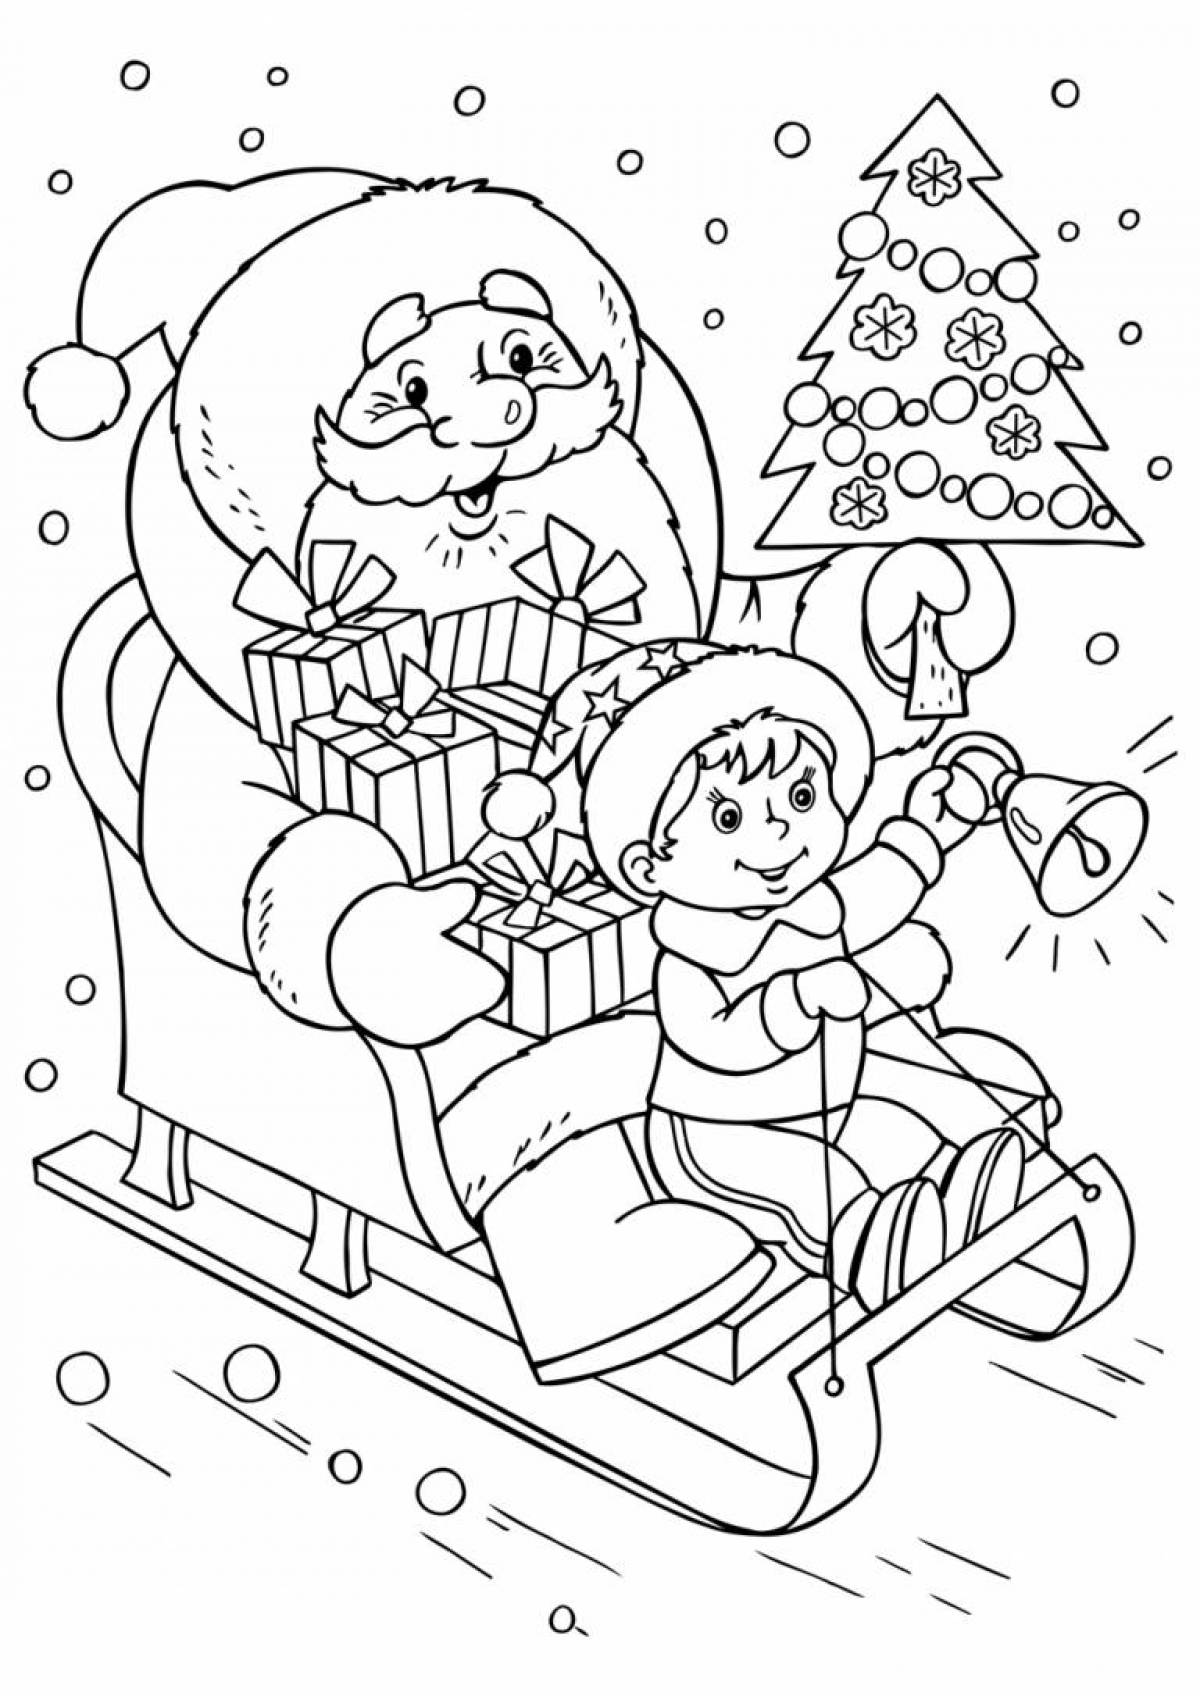 Bright children's Christmas coloring book